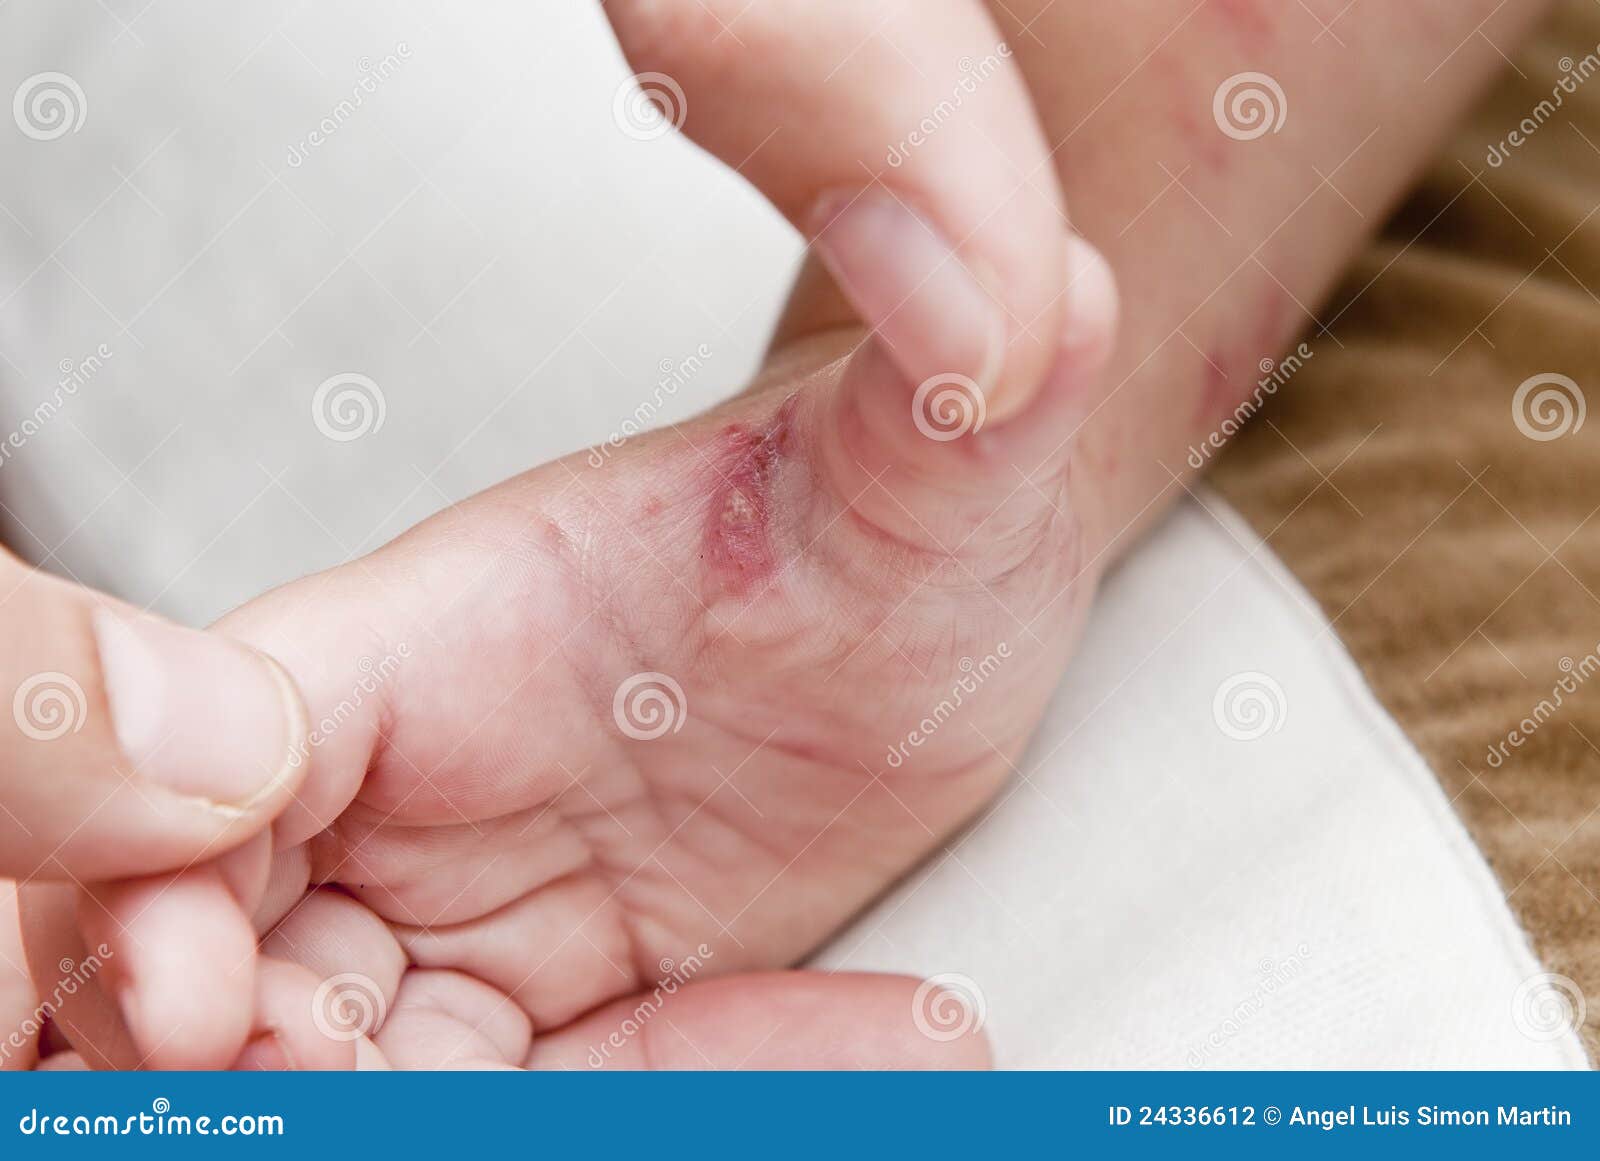 herpes blisters on hand